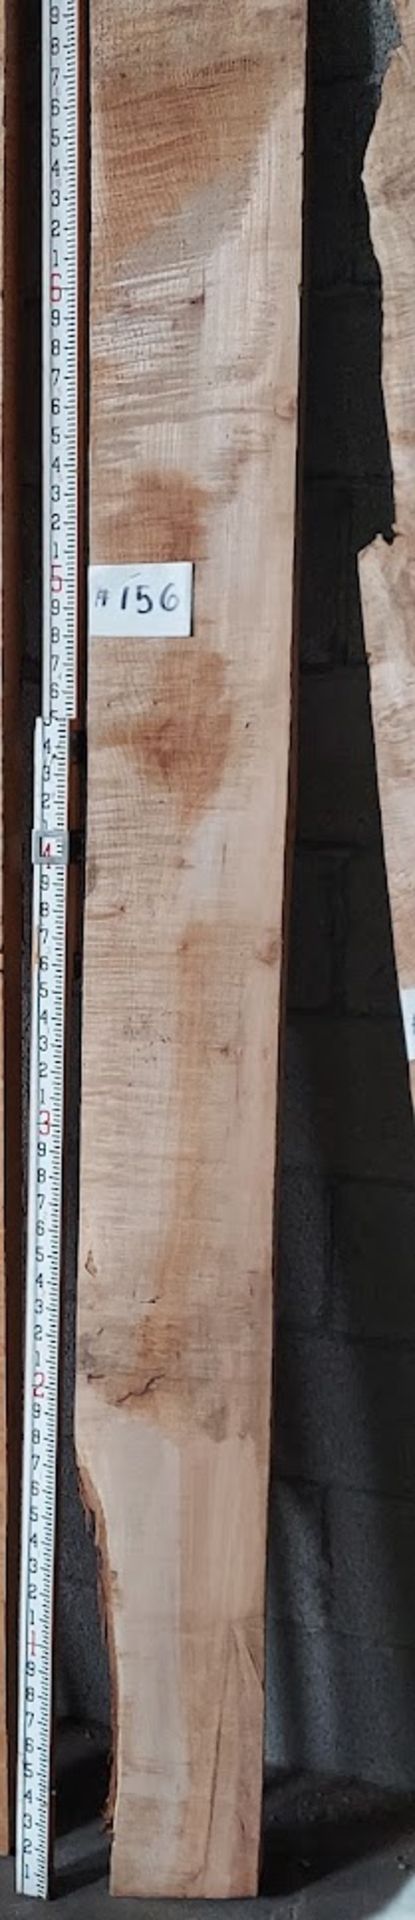 Maple Hardwood Lumber Slab, Size is approx. 84" x 7" - 8-3/4" x 2-3/4" Thick, Curly